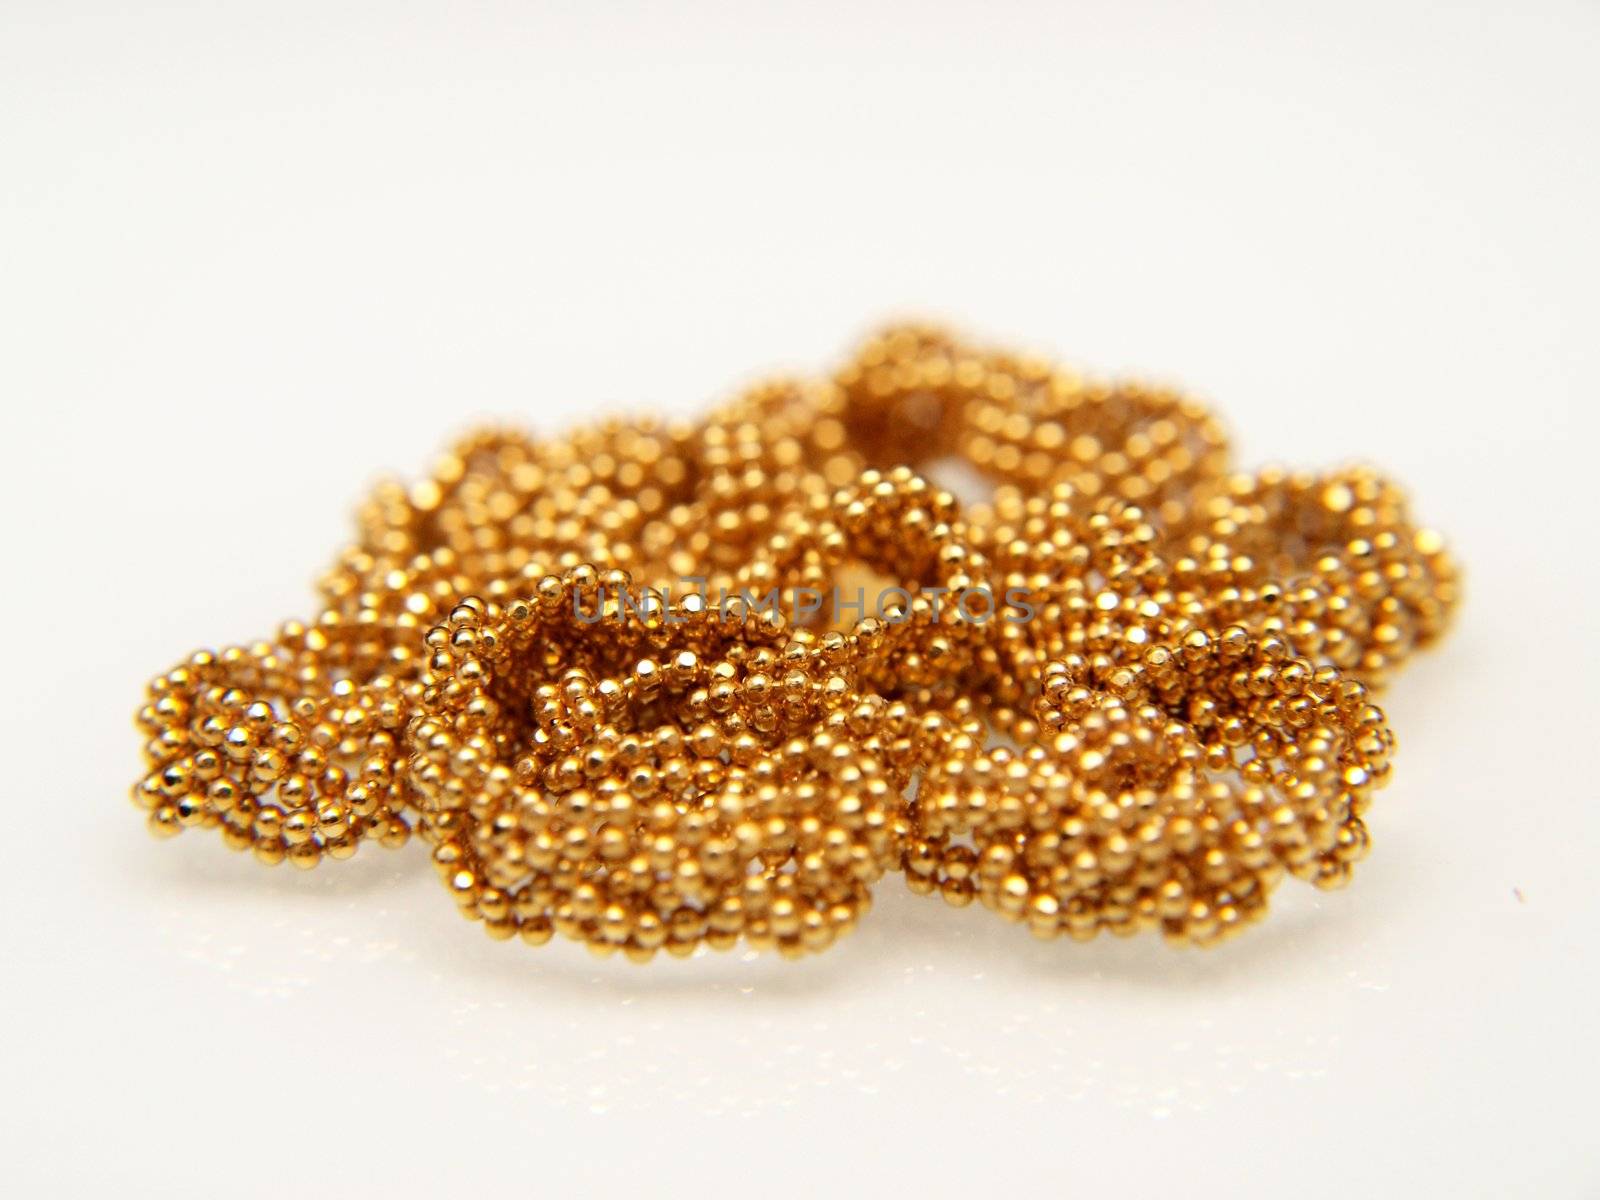 Yellow gold jewellry, isolated towards white background